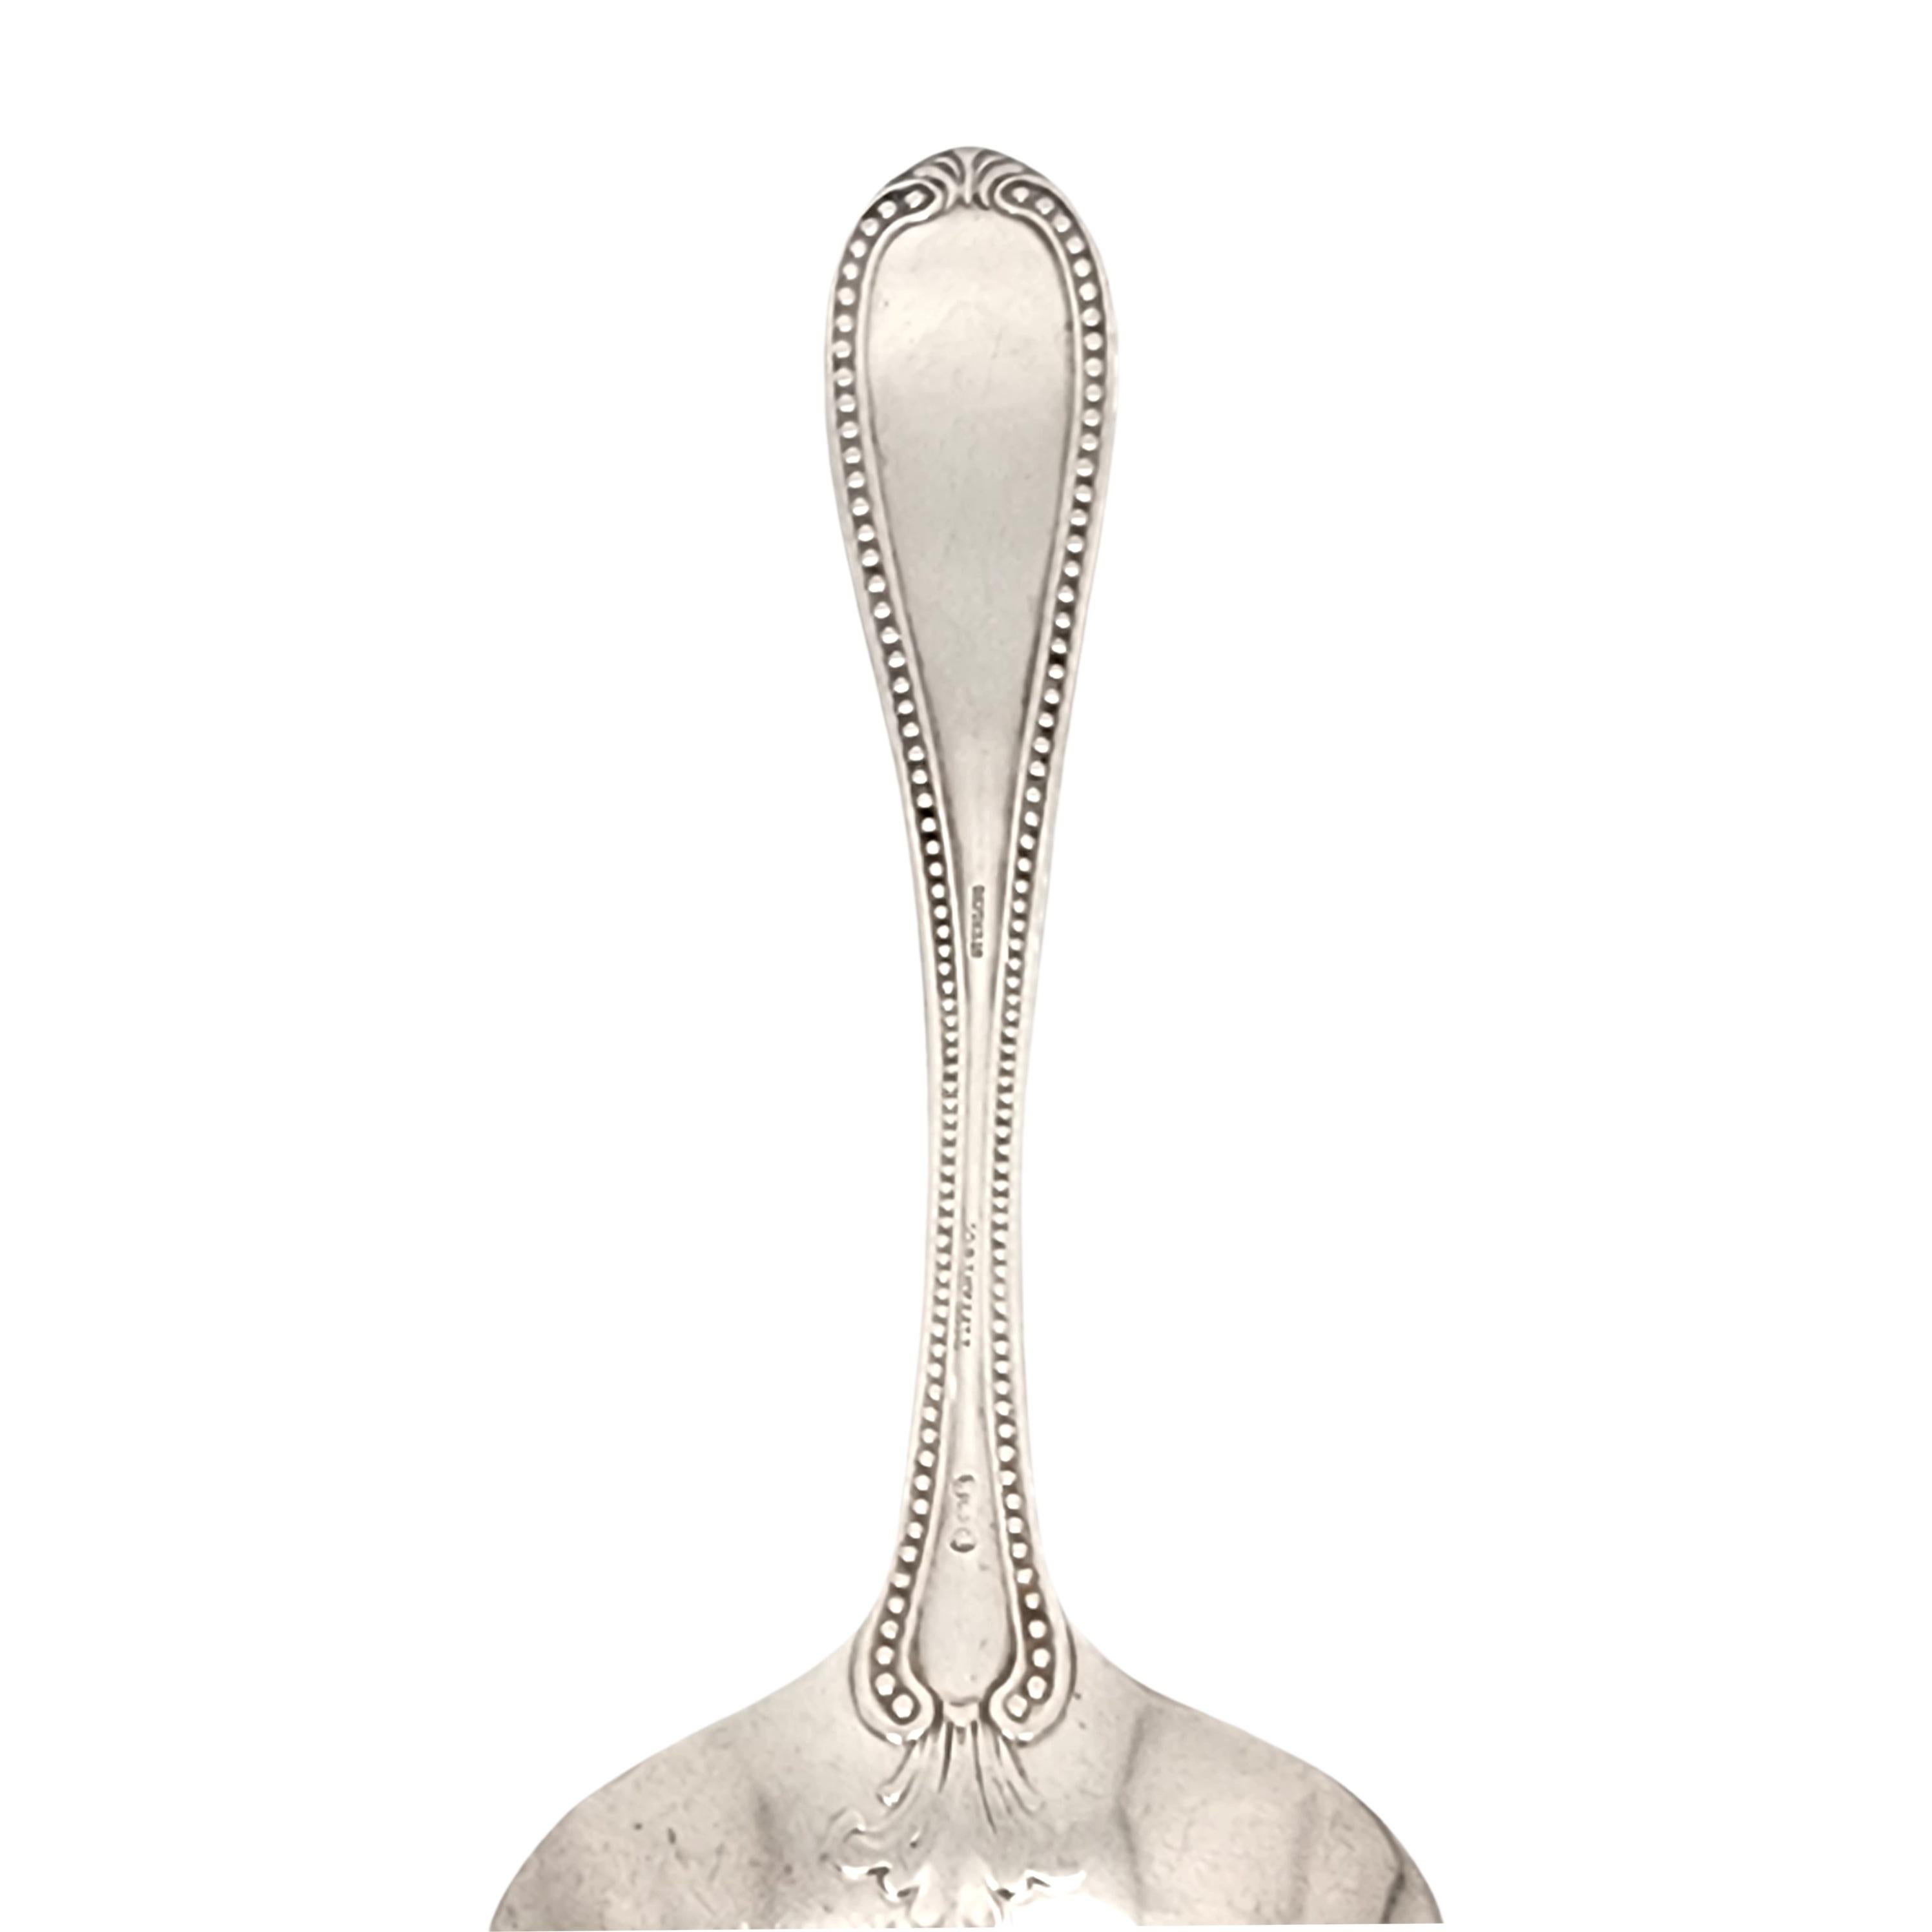 John Polhamus for Tiffany & Co Sterling Silver Bead Ladle with Monogram For Sale 2